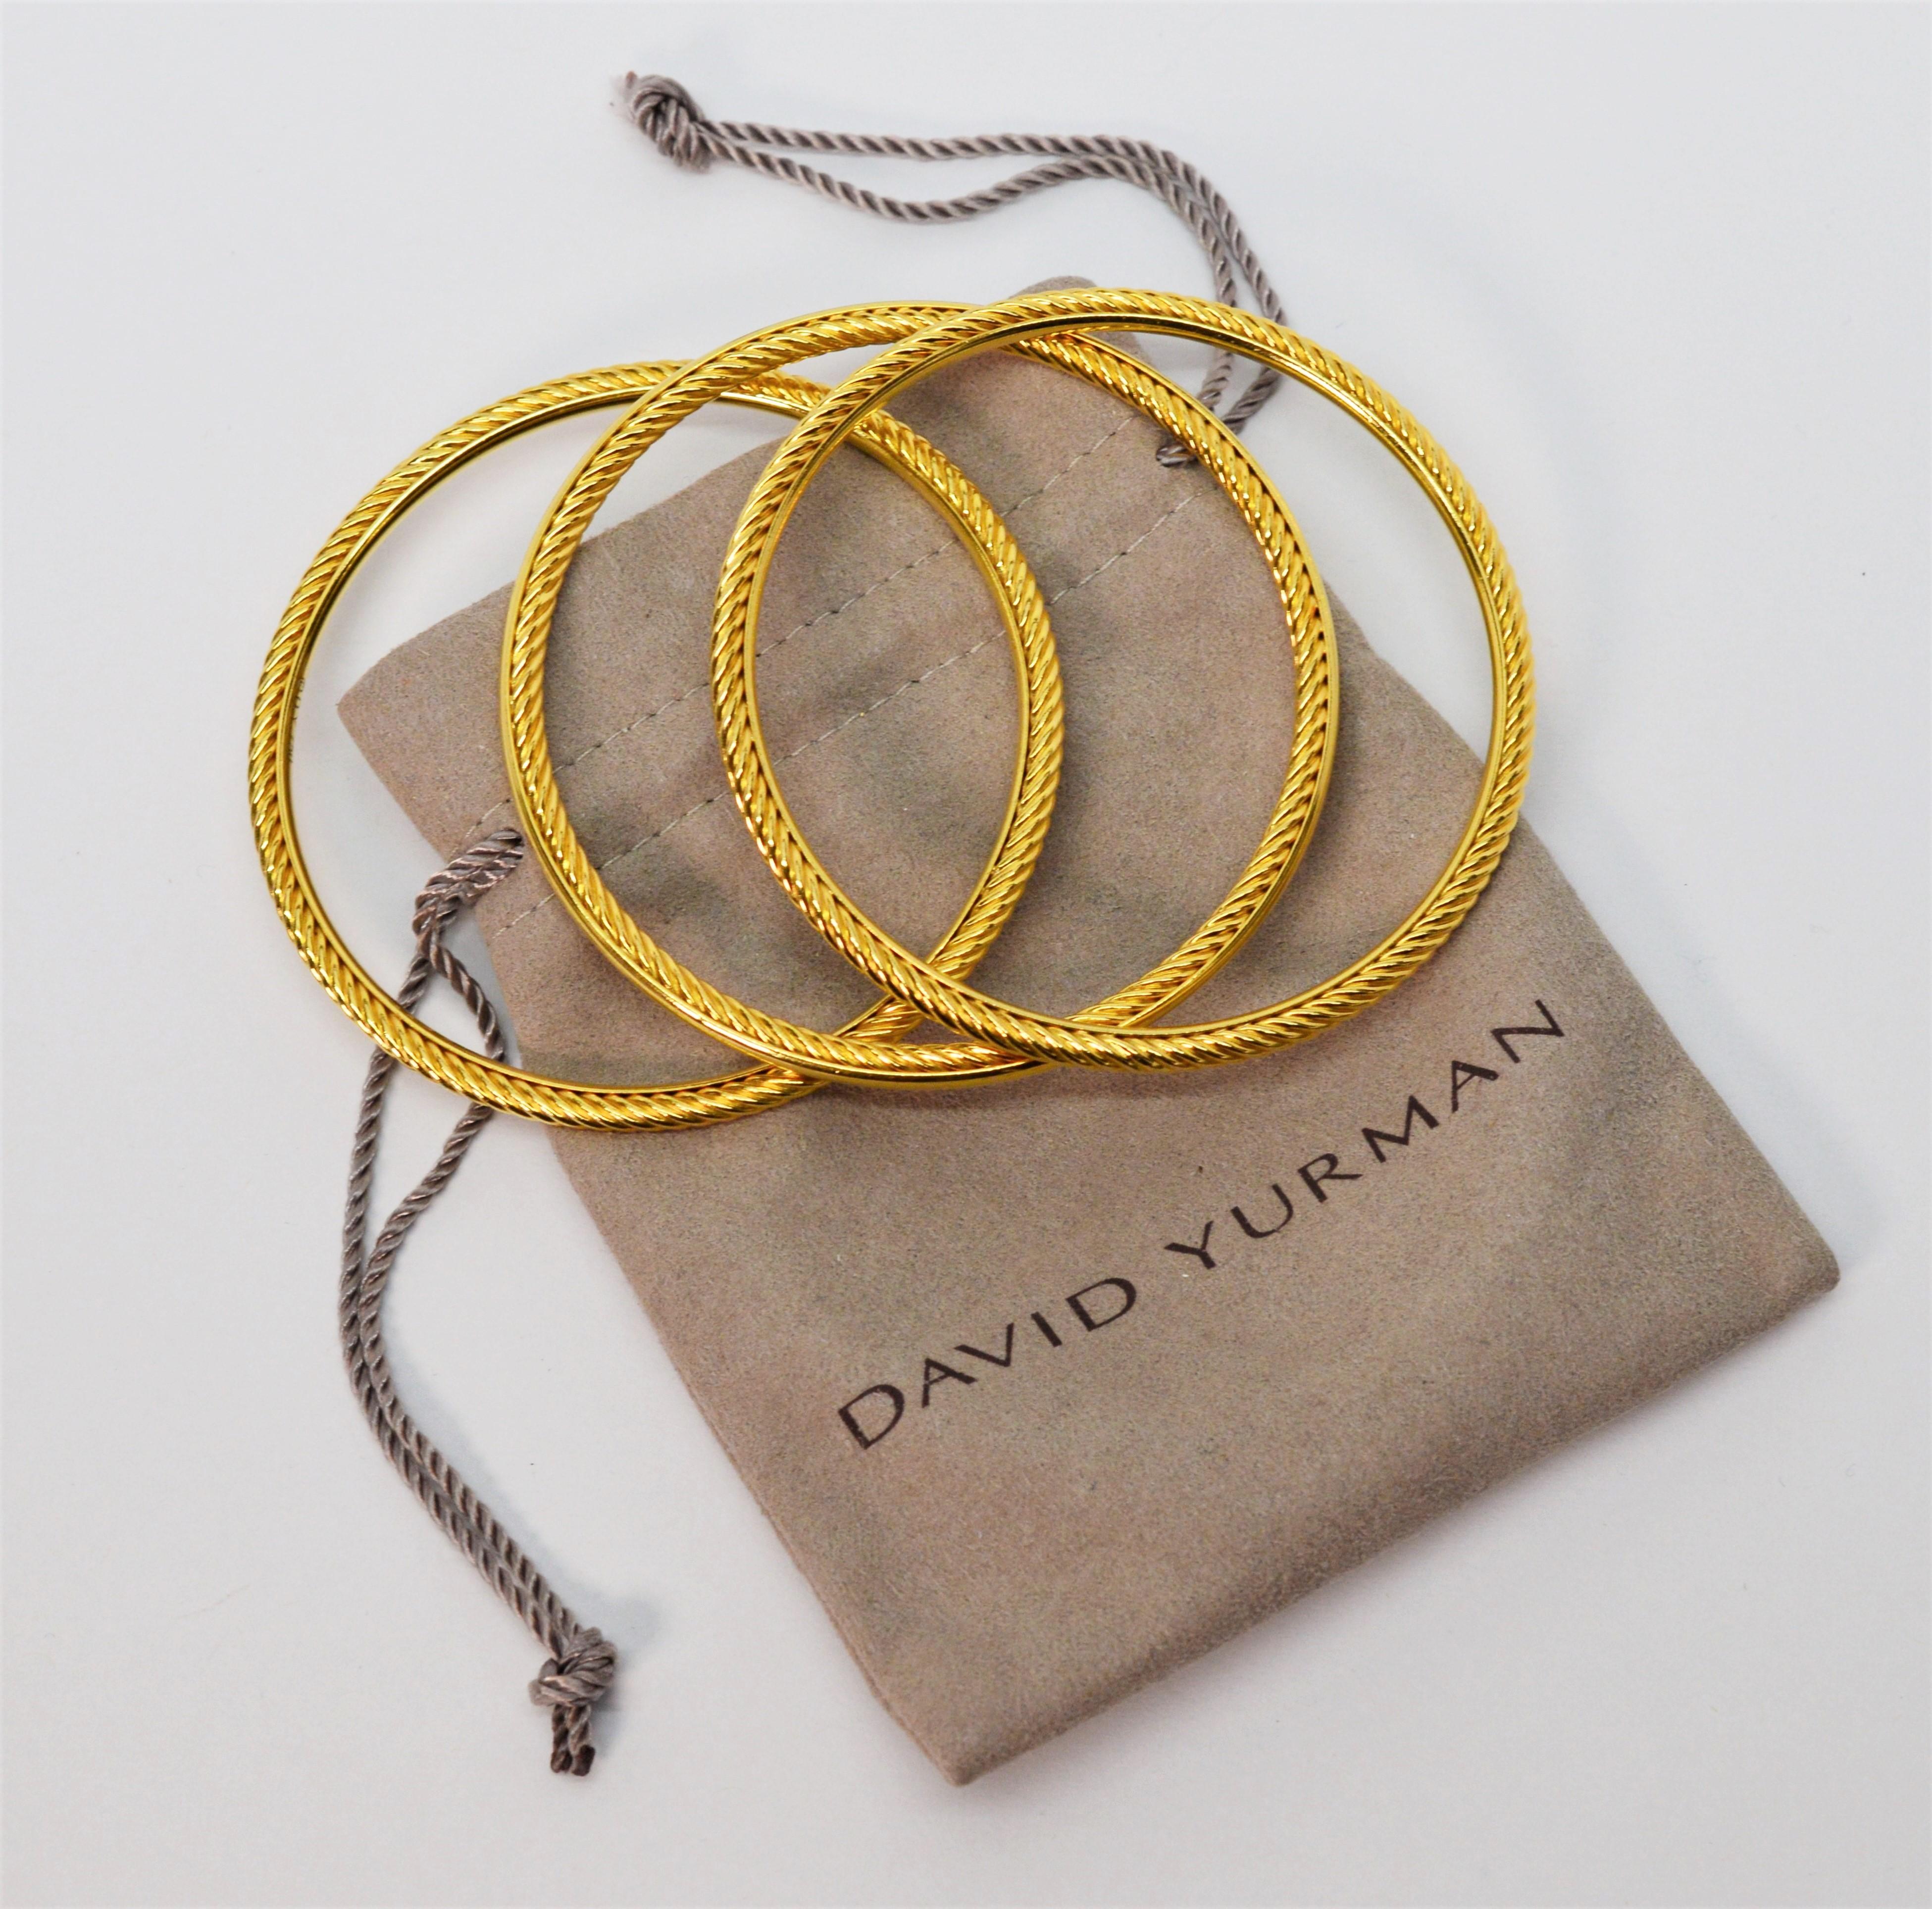 Always fashionable and stackable, a set of three eighteen karat 18k yellow gold bangle bracelets by David Yurman. Appointed with classic DY elements, the trio includes two with an outside cable detail and the third bracelet has a complementing